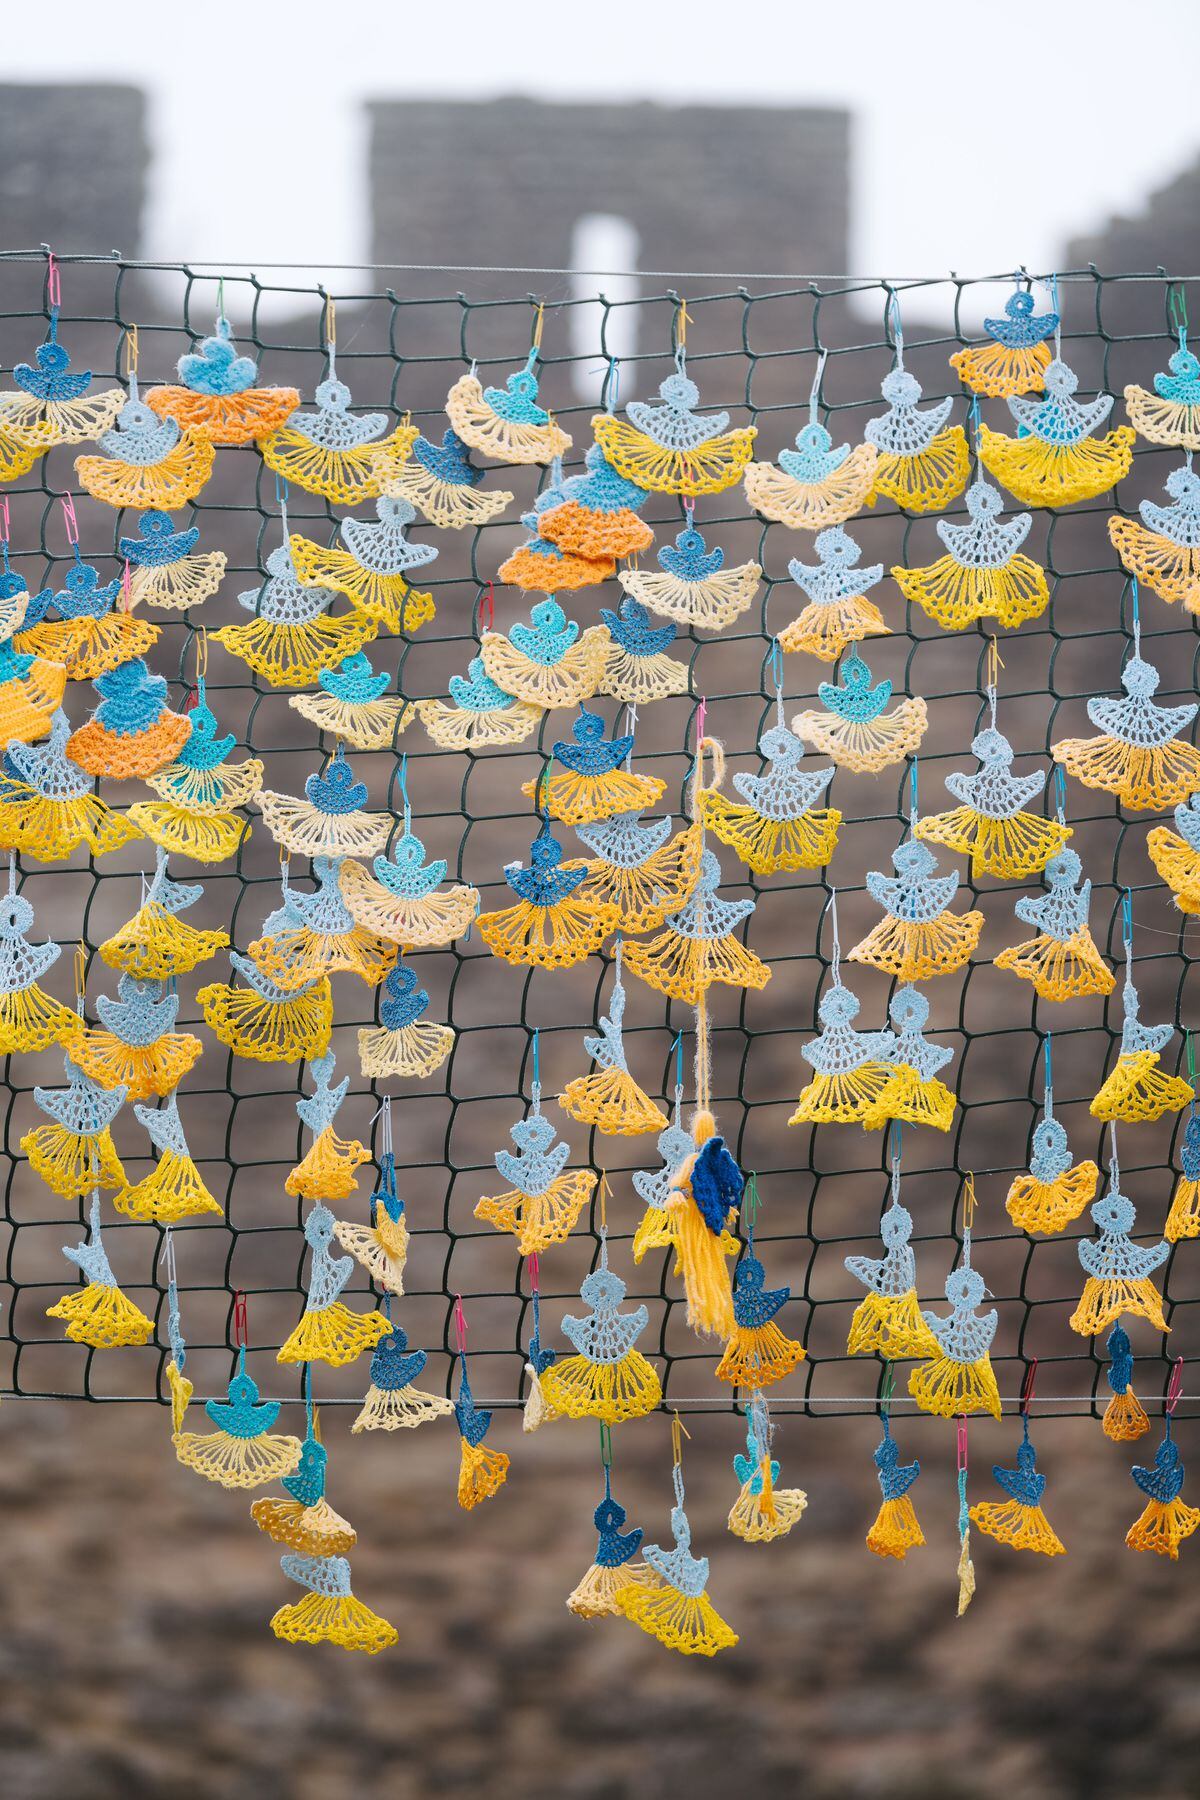 The artwork is made up of 500 hand-made angels, each representing a child killed in the war in Ukraine.